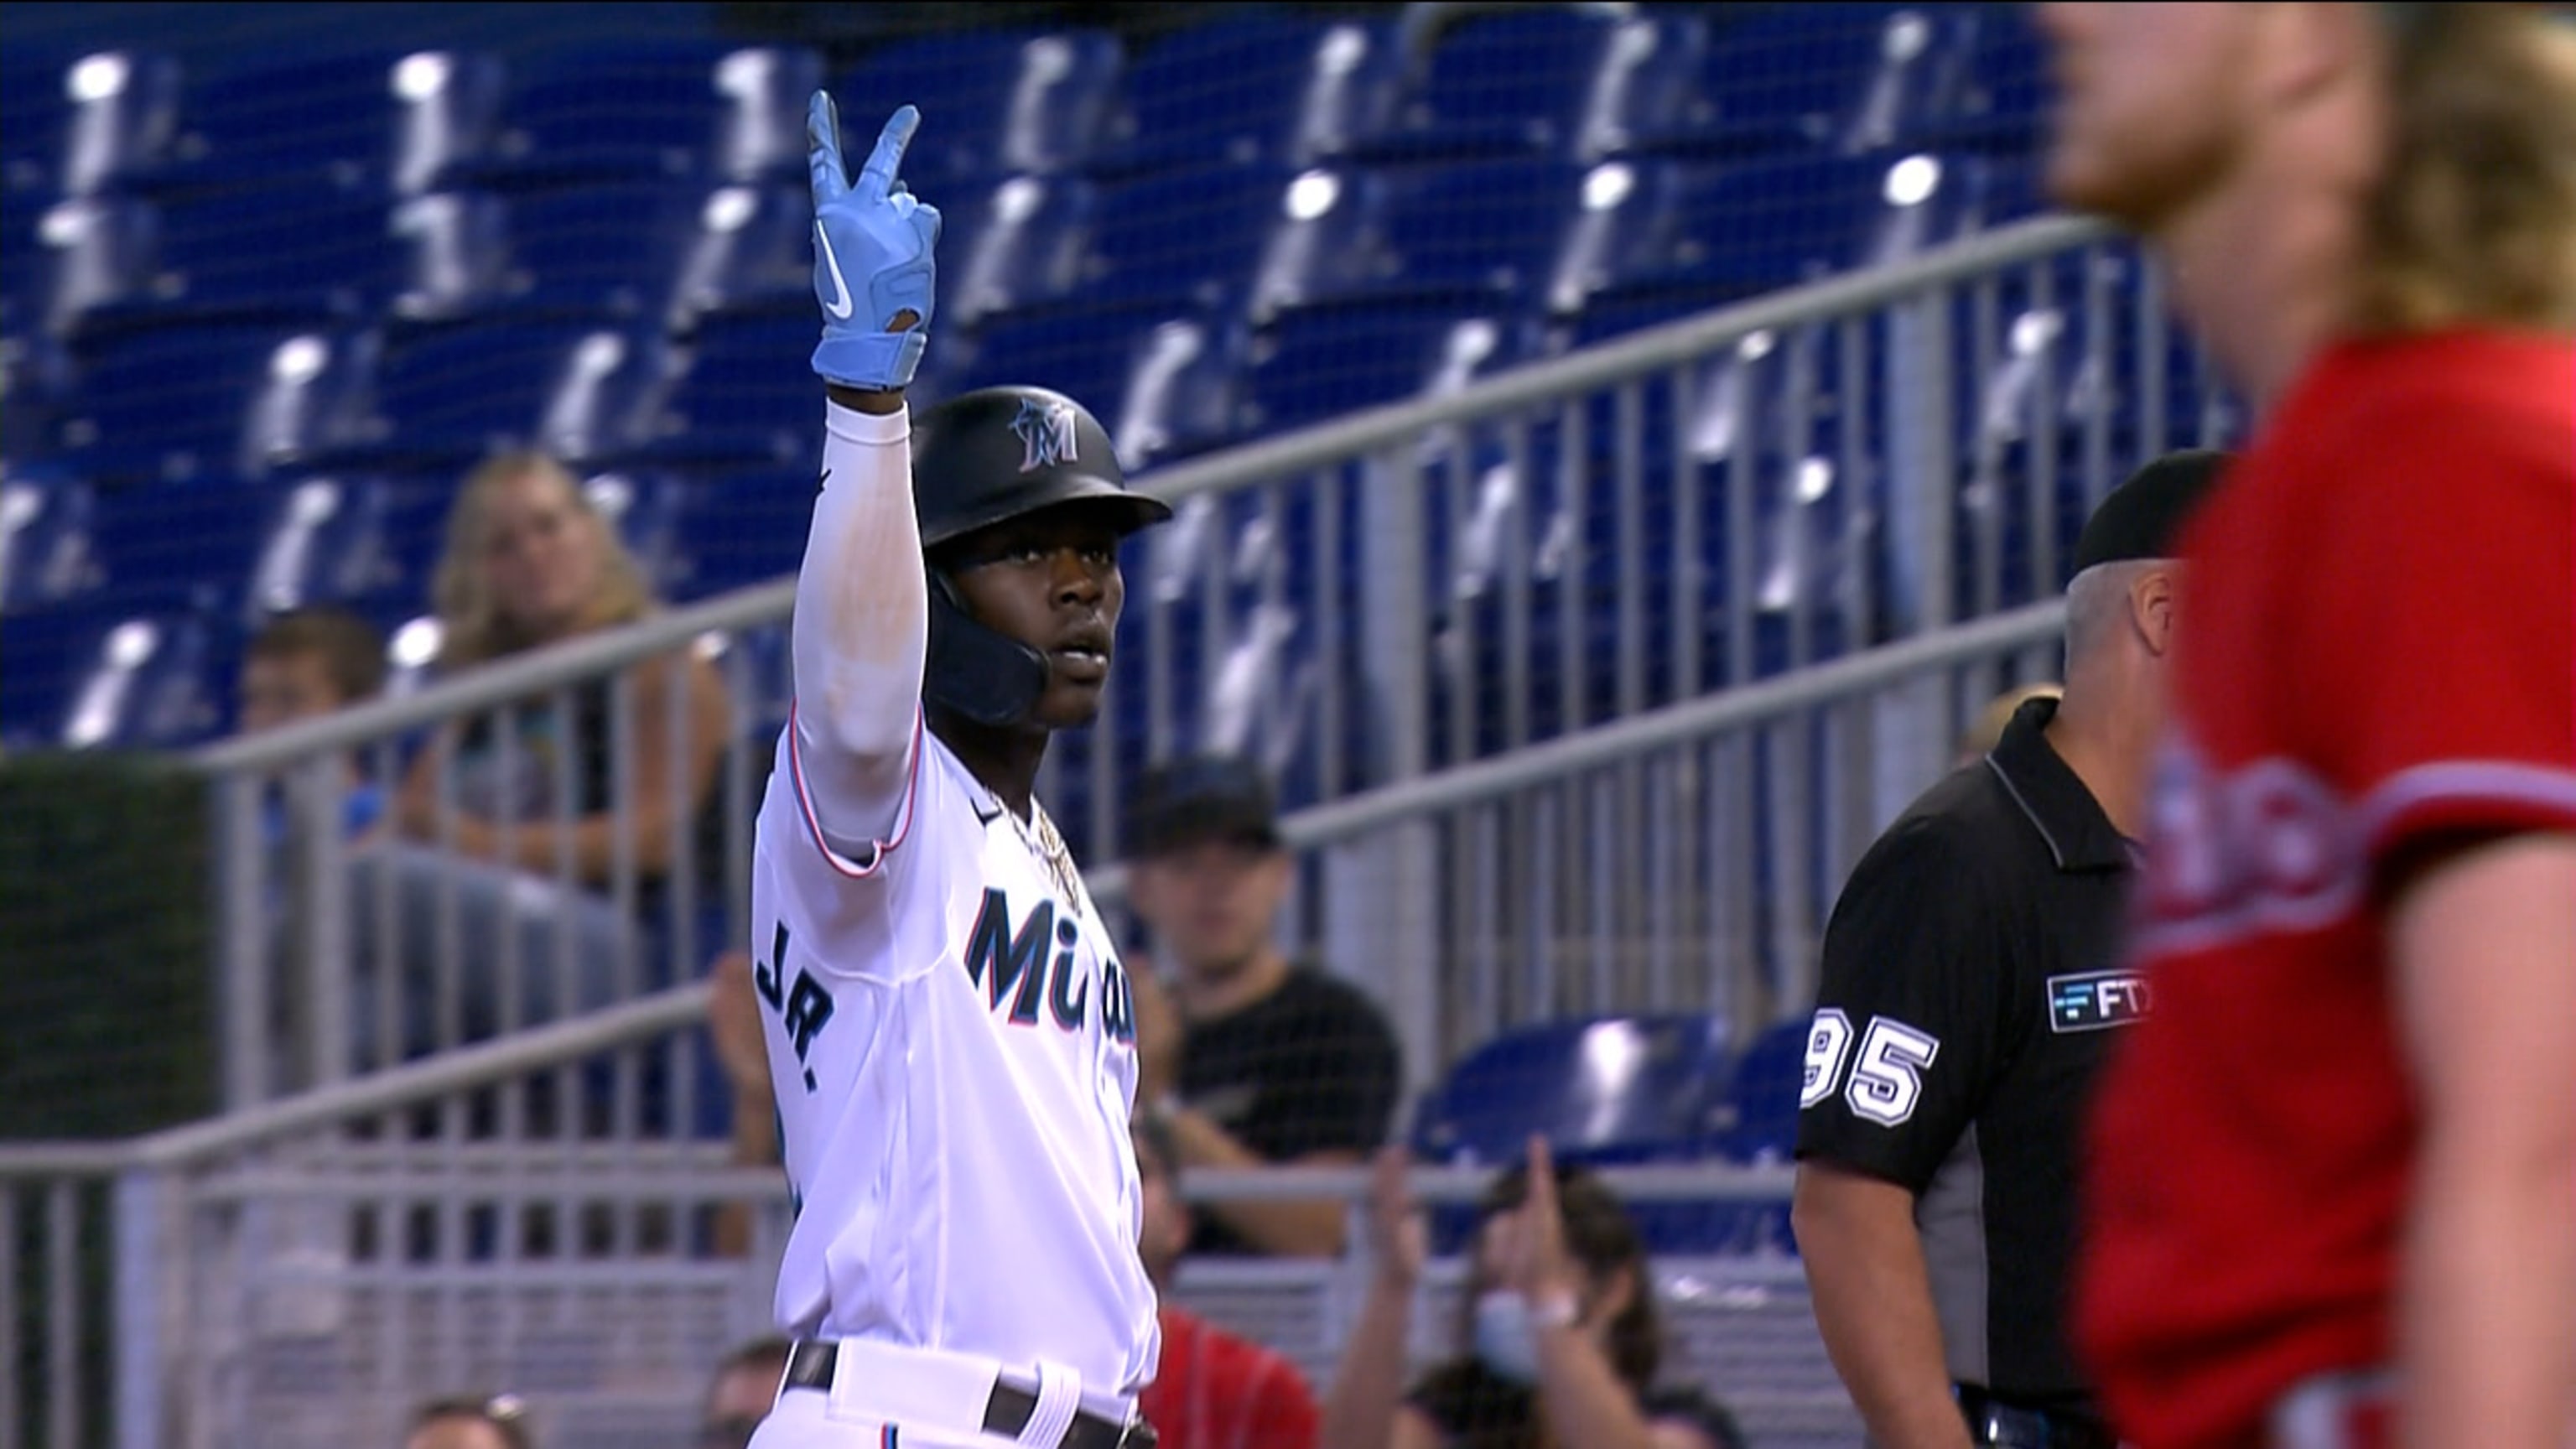 Miami Marlins on X: By popular demand, the #Marlins Blue Jersey